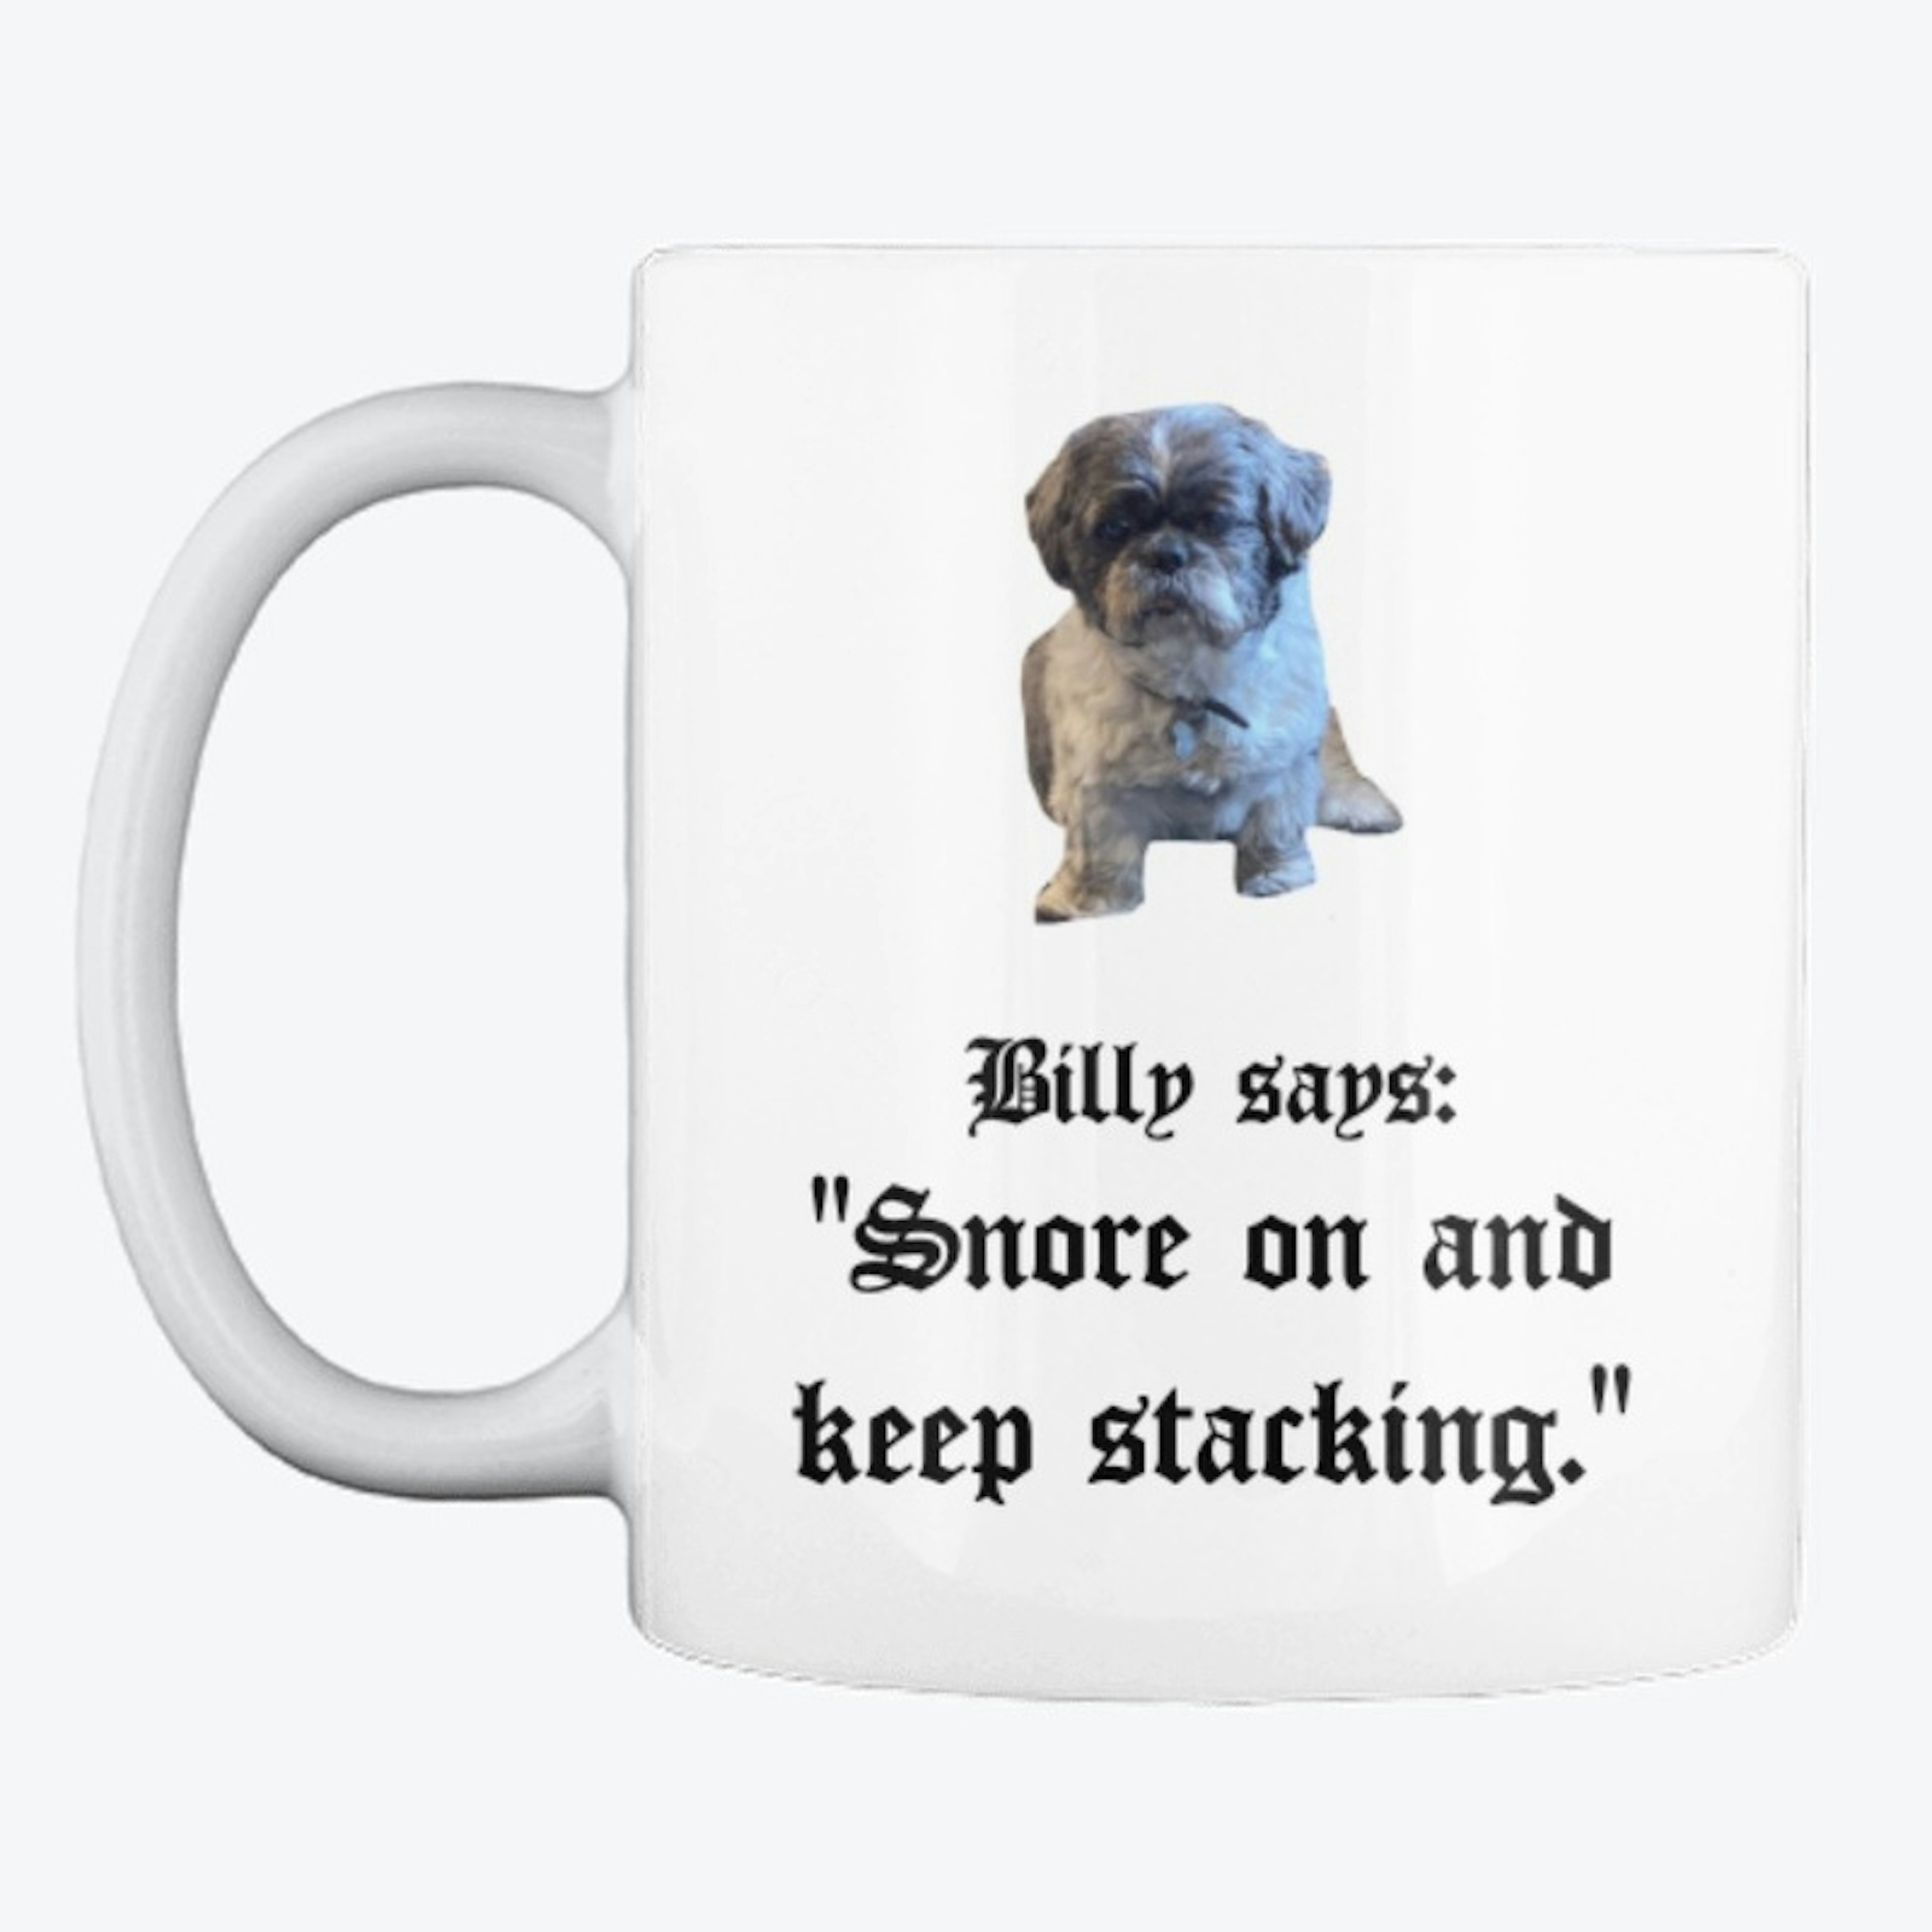 Snore on and keep stacking.